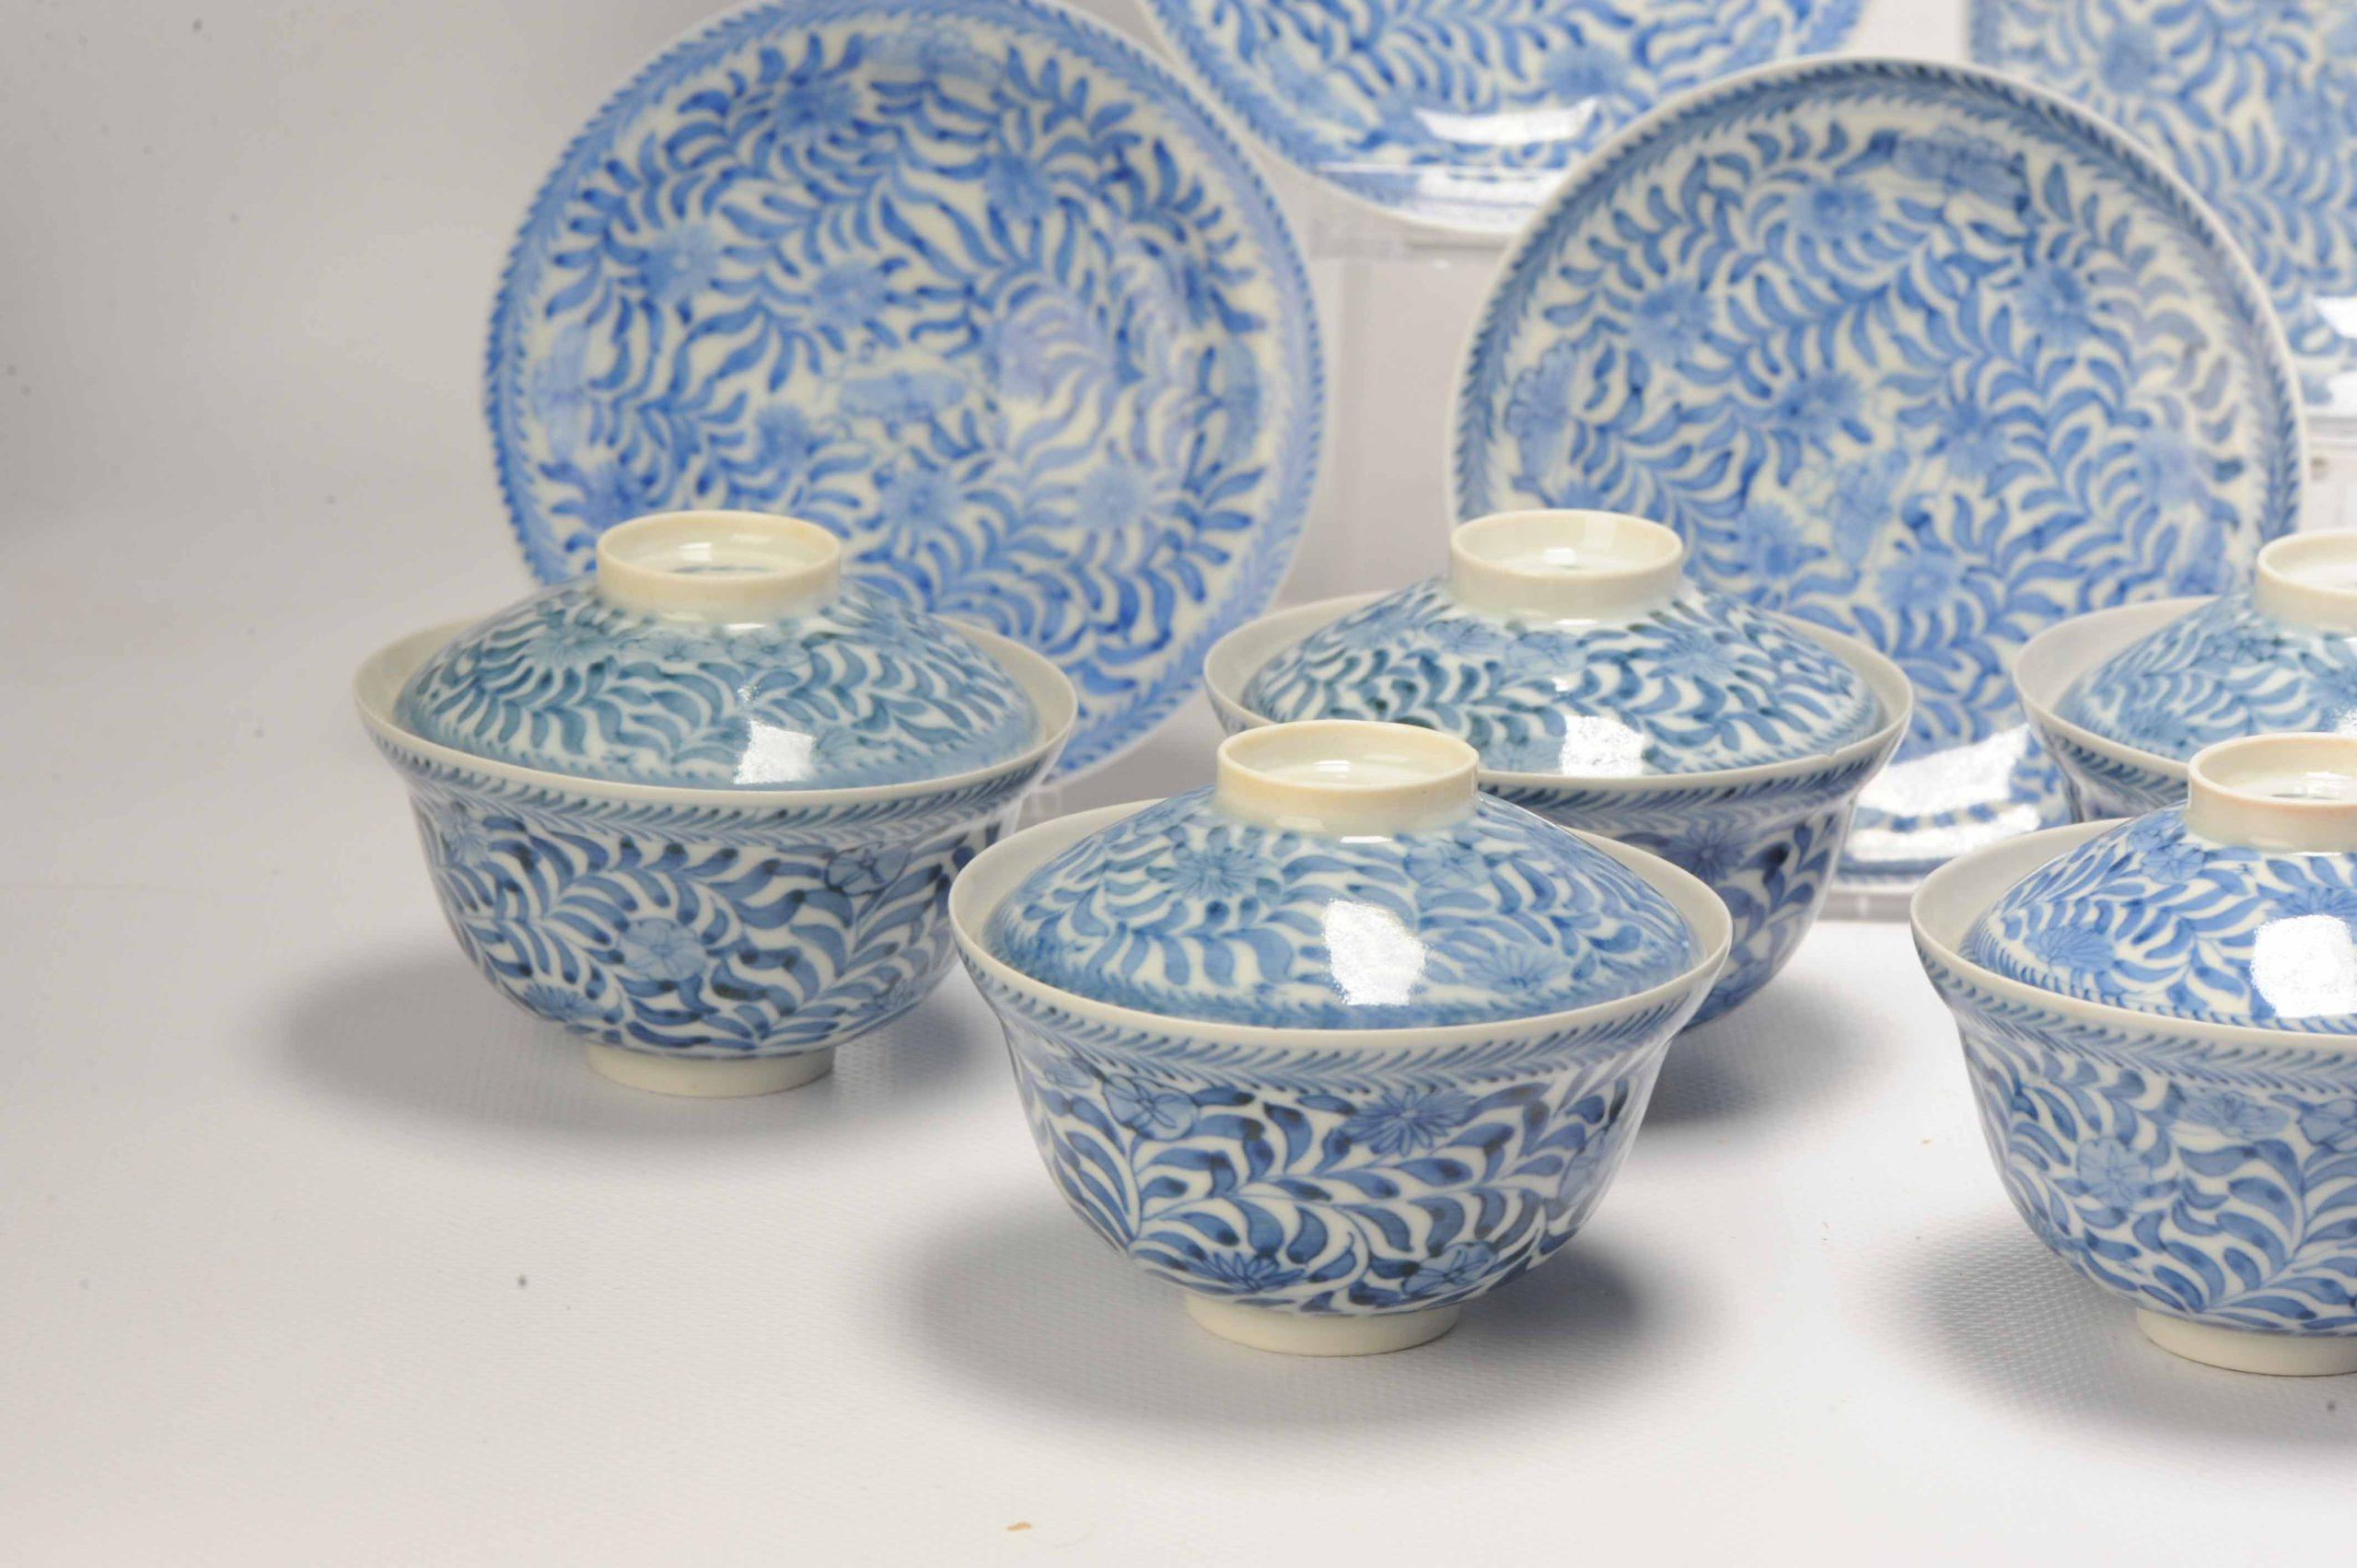 A very nice set of 9 gaiwan bowls decorated with parsley and butterflies. They are marked on the base with a six character mark.

Additional information:
Material: Porcelain & Pottery
Region of Origin: Japan
Period: 19th century Meiji Periode